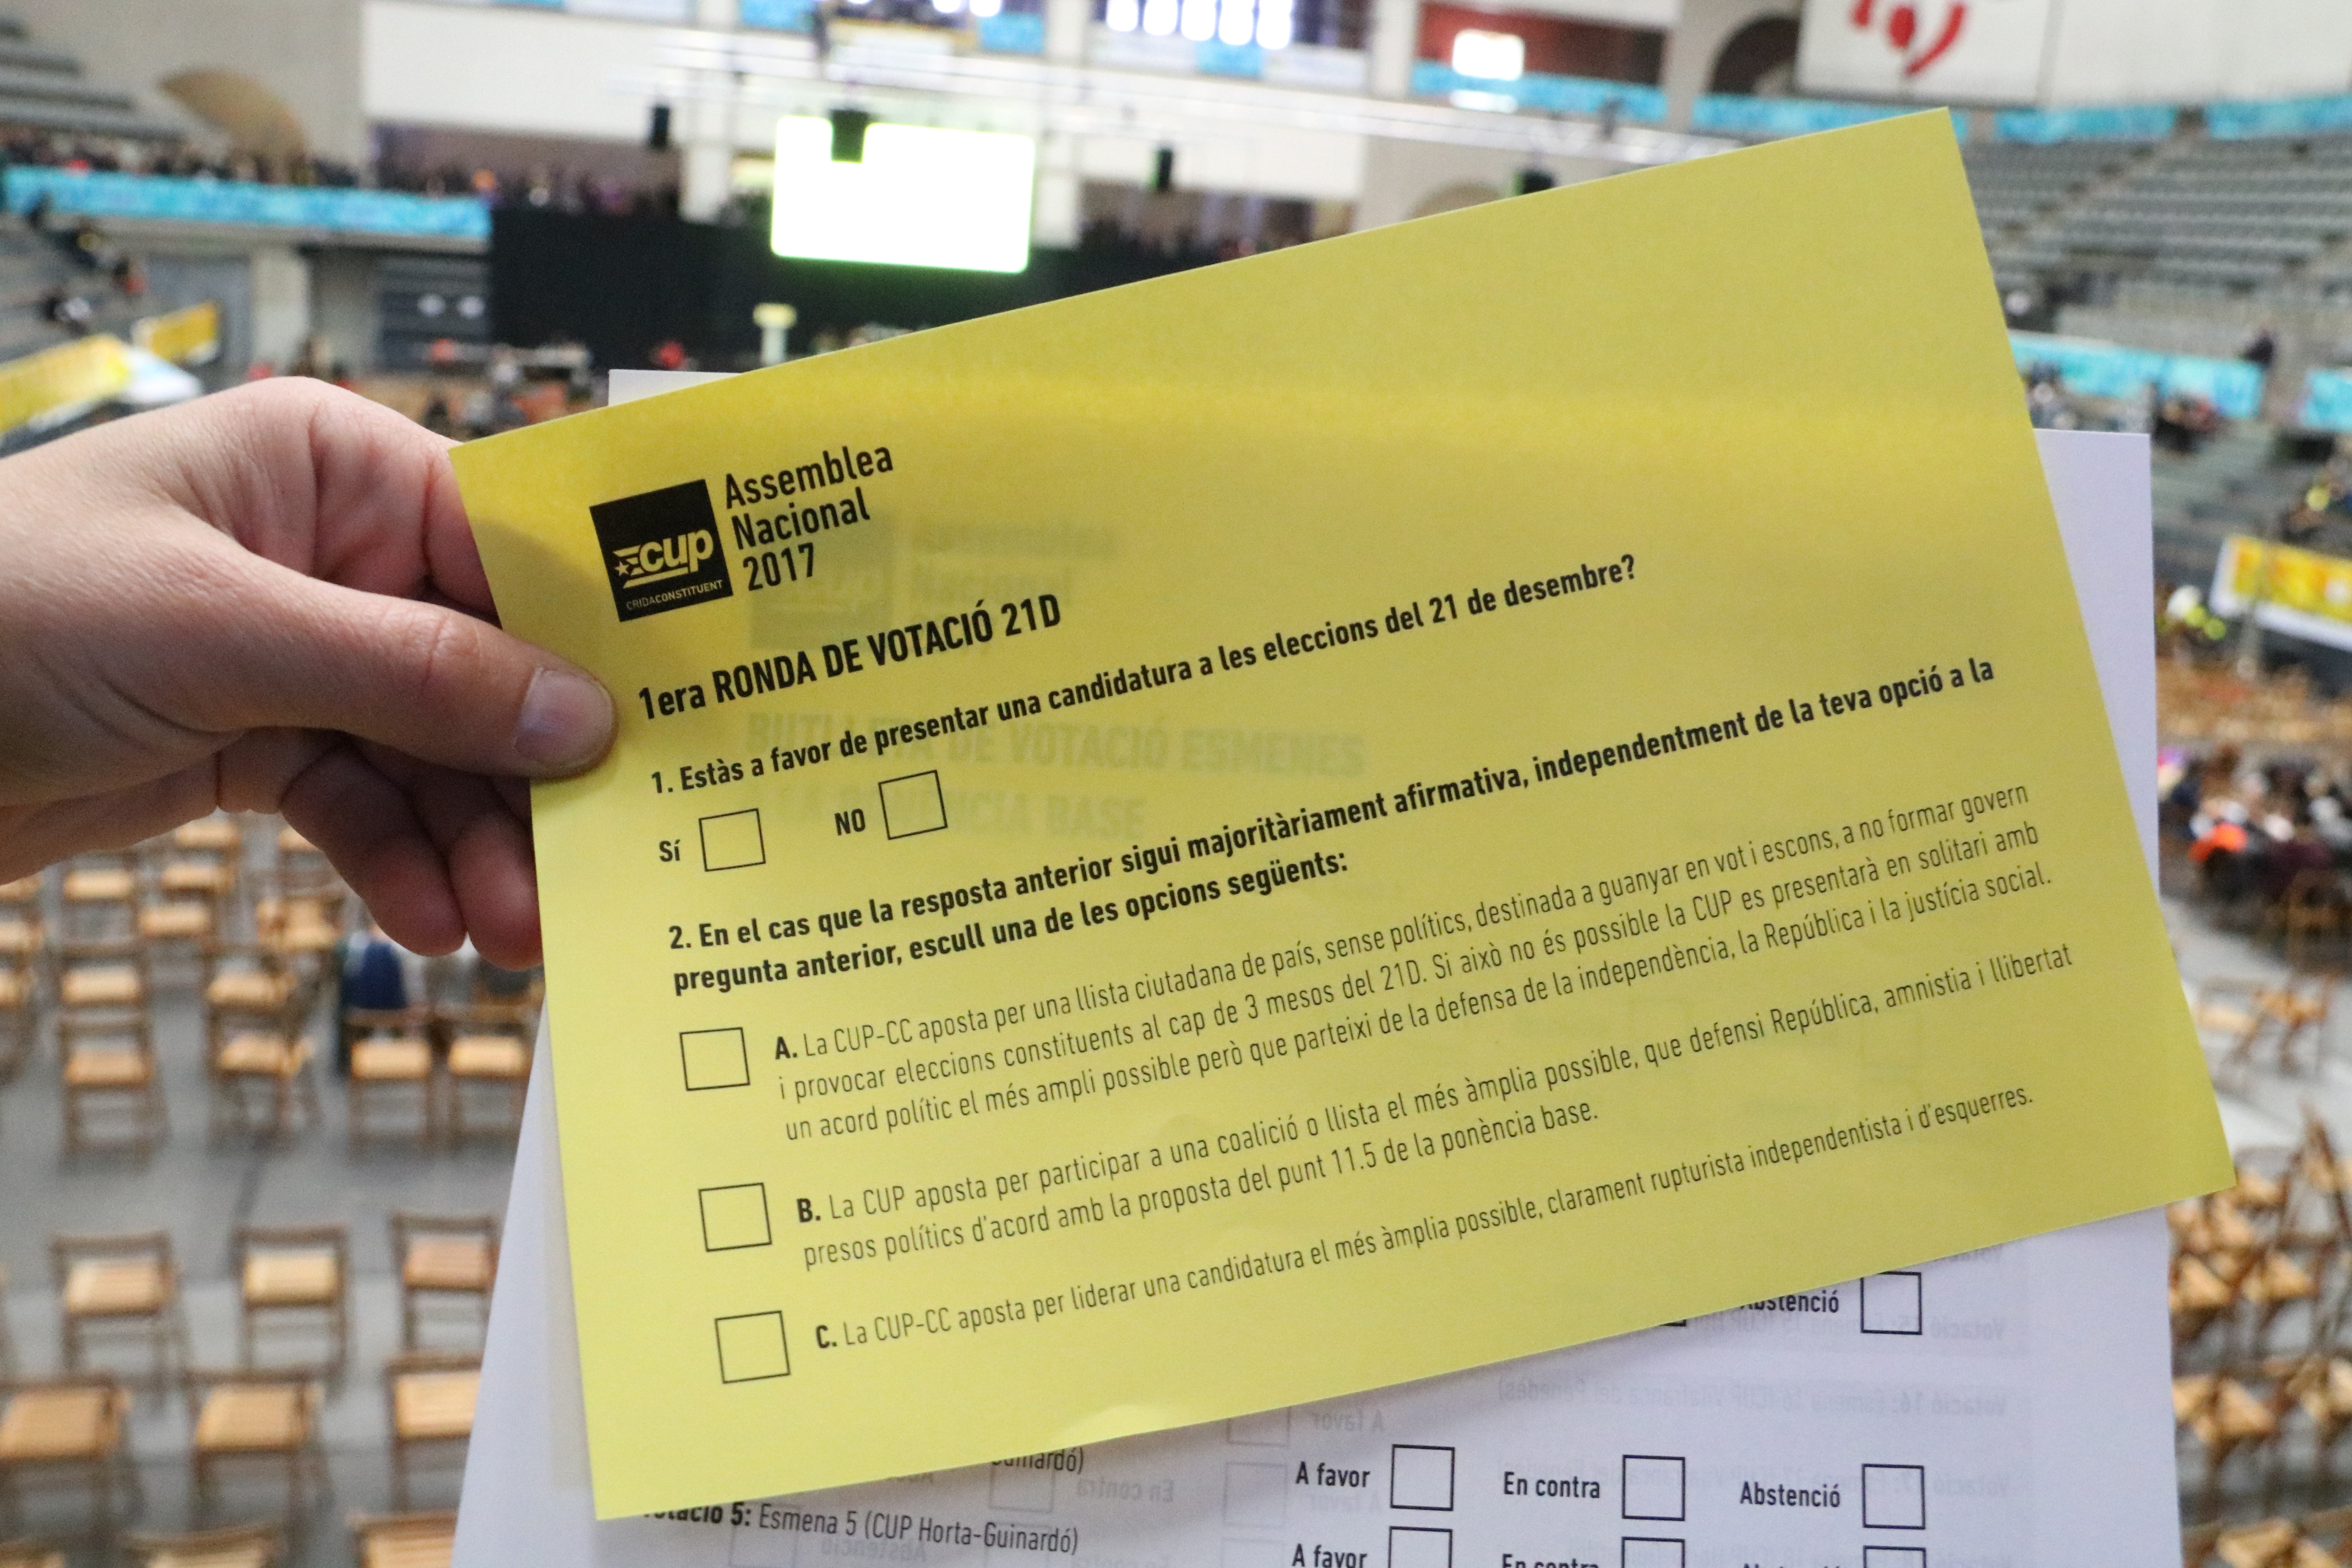 The ballot used during the CUP's exceptional national assembly on November 12, 2017 (by Maria Belmez)